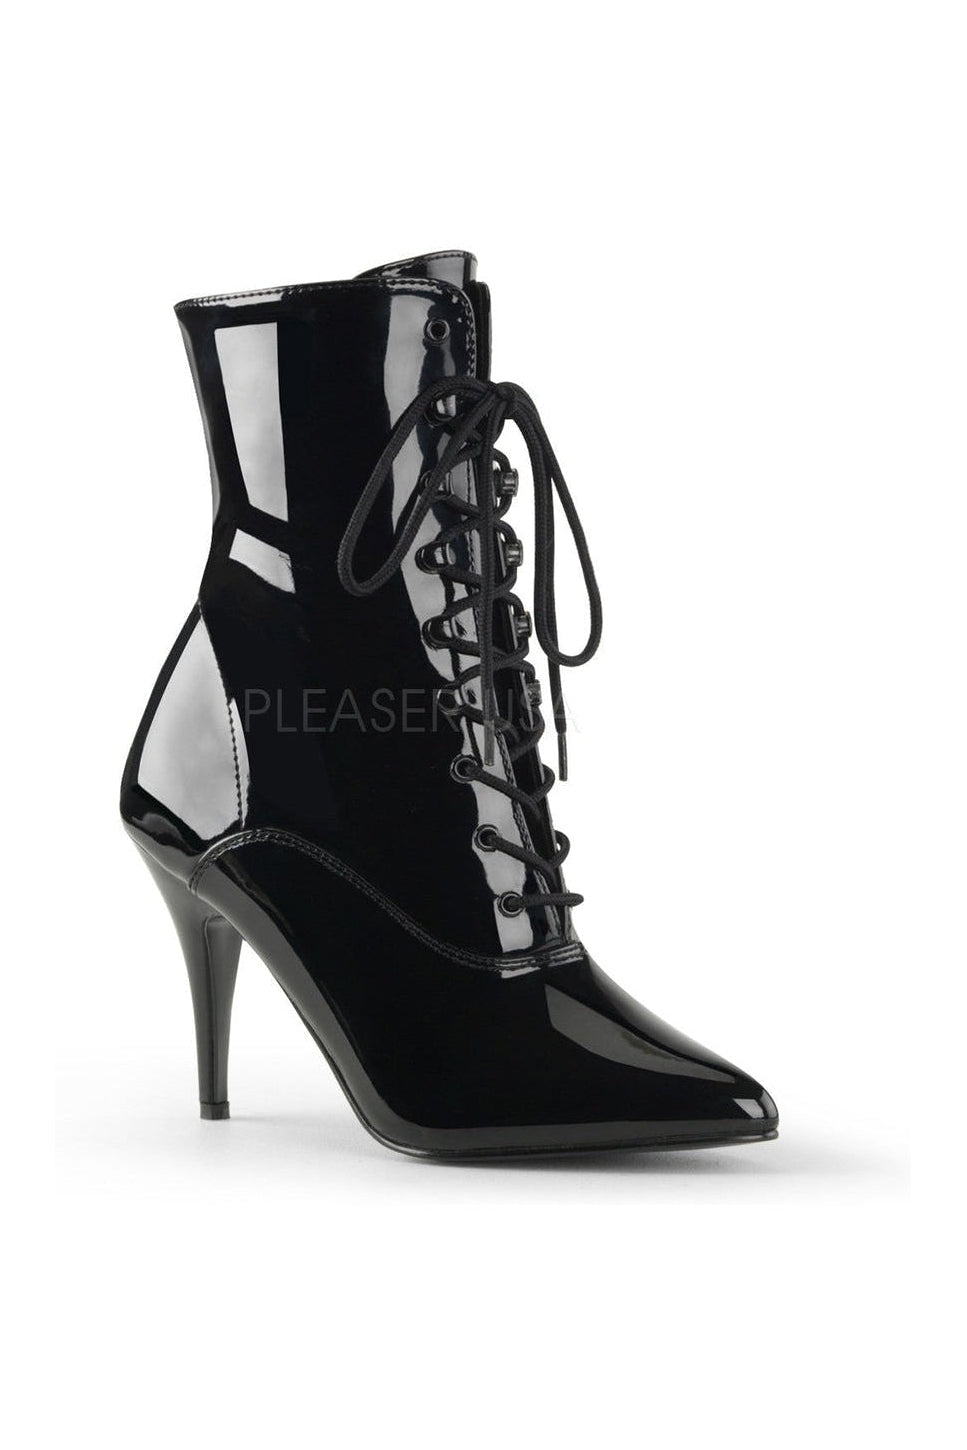 VANITY-1020 Ankle Boot | Black Patent-Pleaser-Black-Ankle Boots-SEXYSHOES.COM